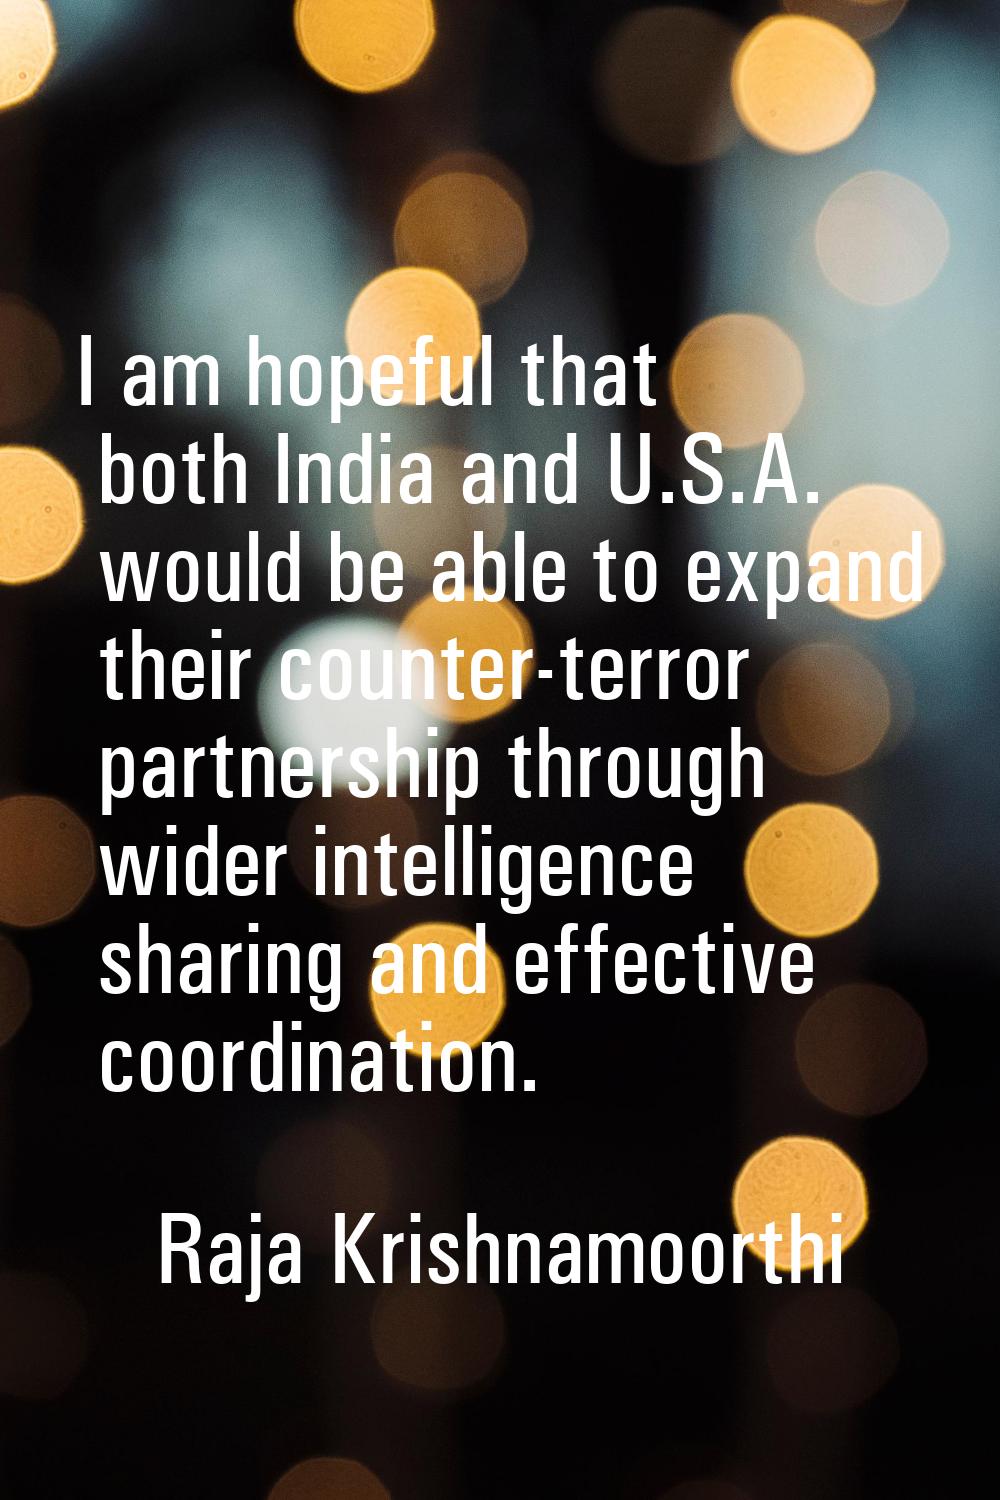 I am hopeful that both India and U.S.A. would be able to expand their counter-terror partnership th